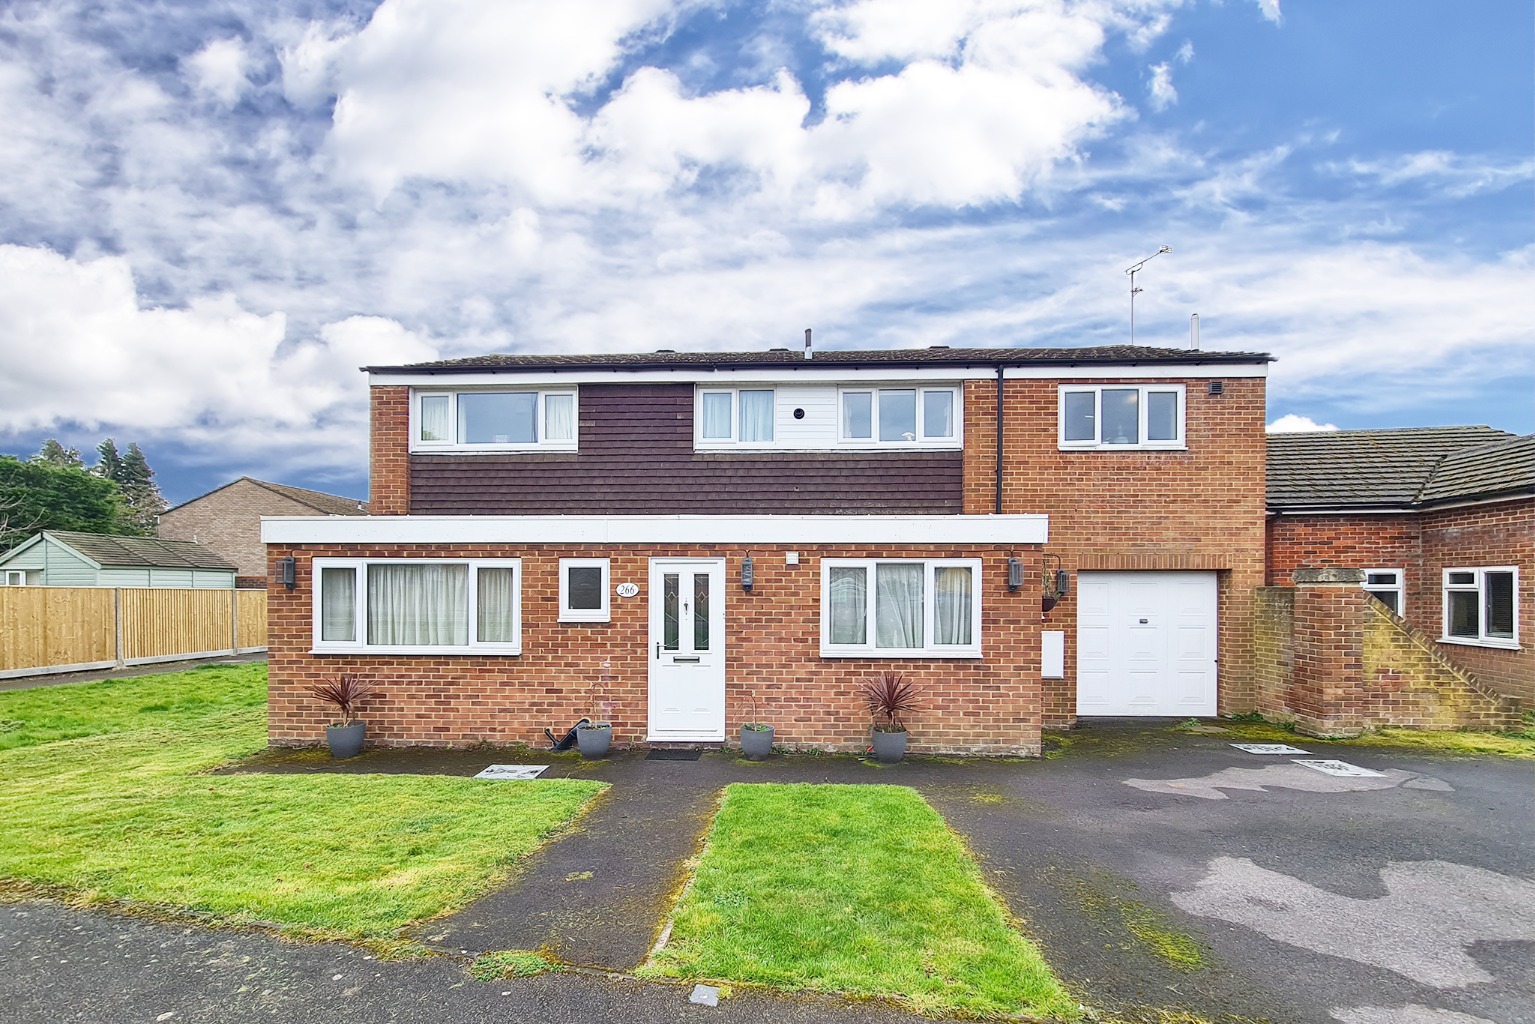 Four bedroom family home spread over 2,000sqft! Wait until you see the property video!! An exceptionally large four bedroom family home with three reception rooms & off street parking.